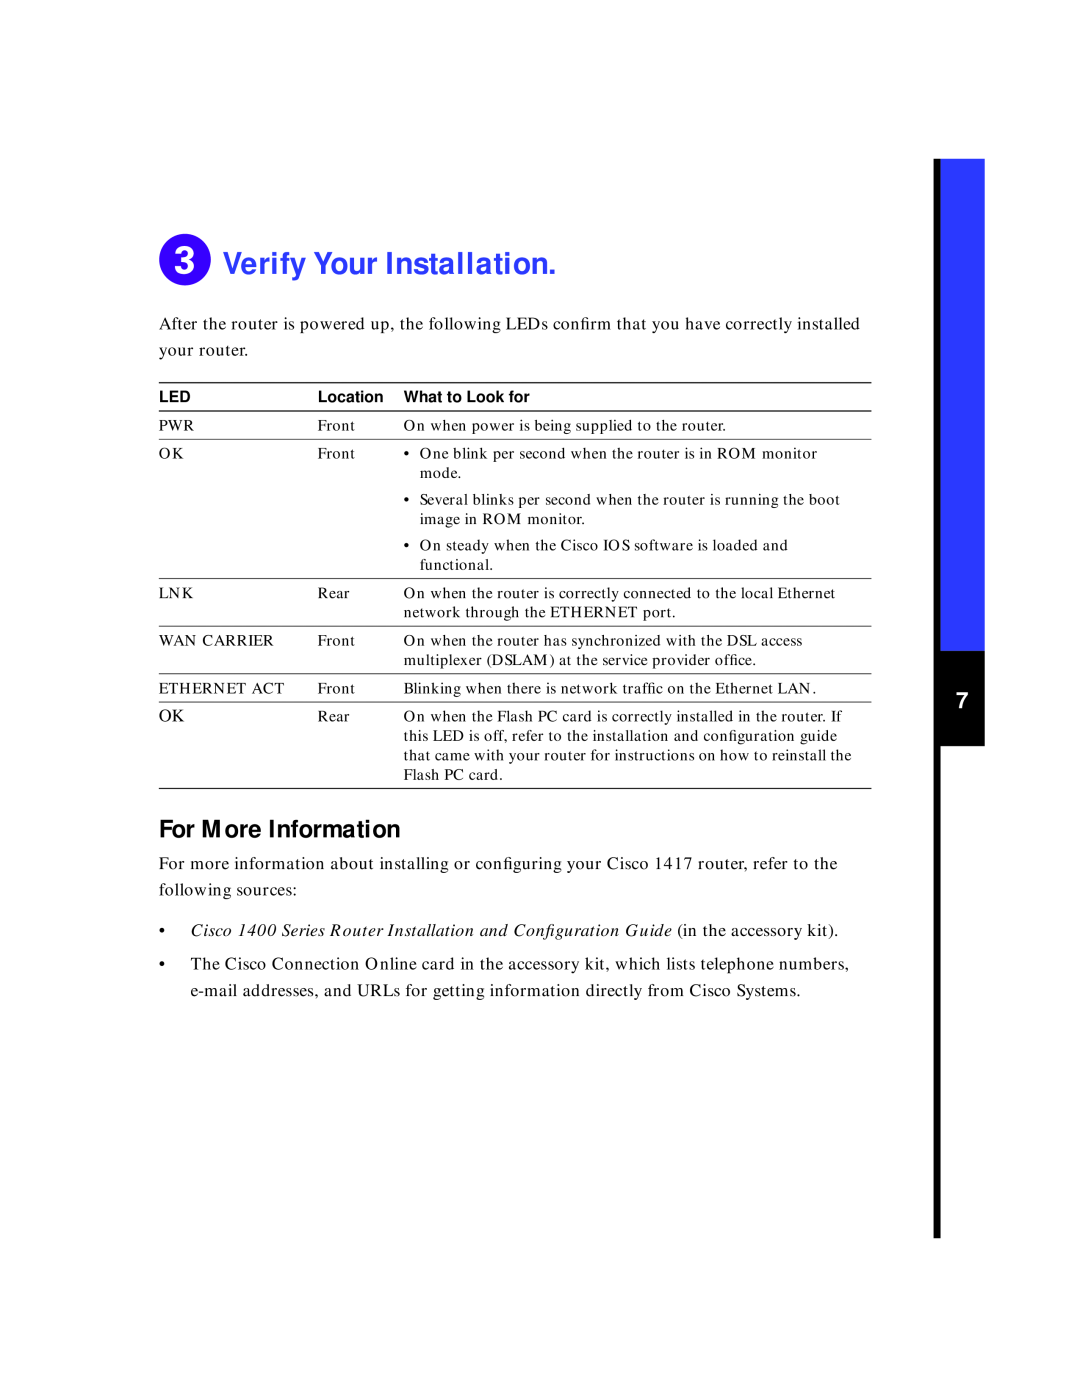 Cisco Systems 1417 quick start Verify Your Installation, For More Information 